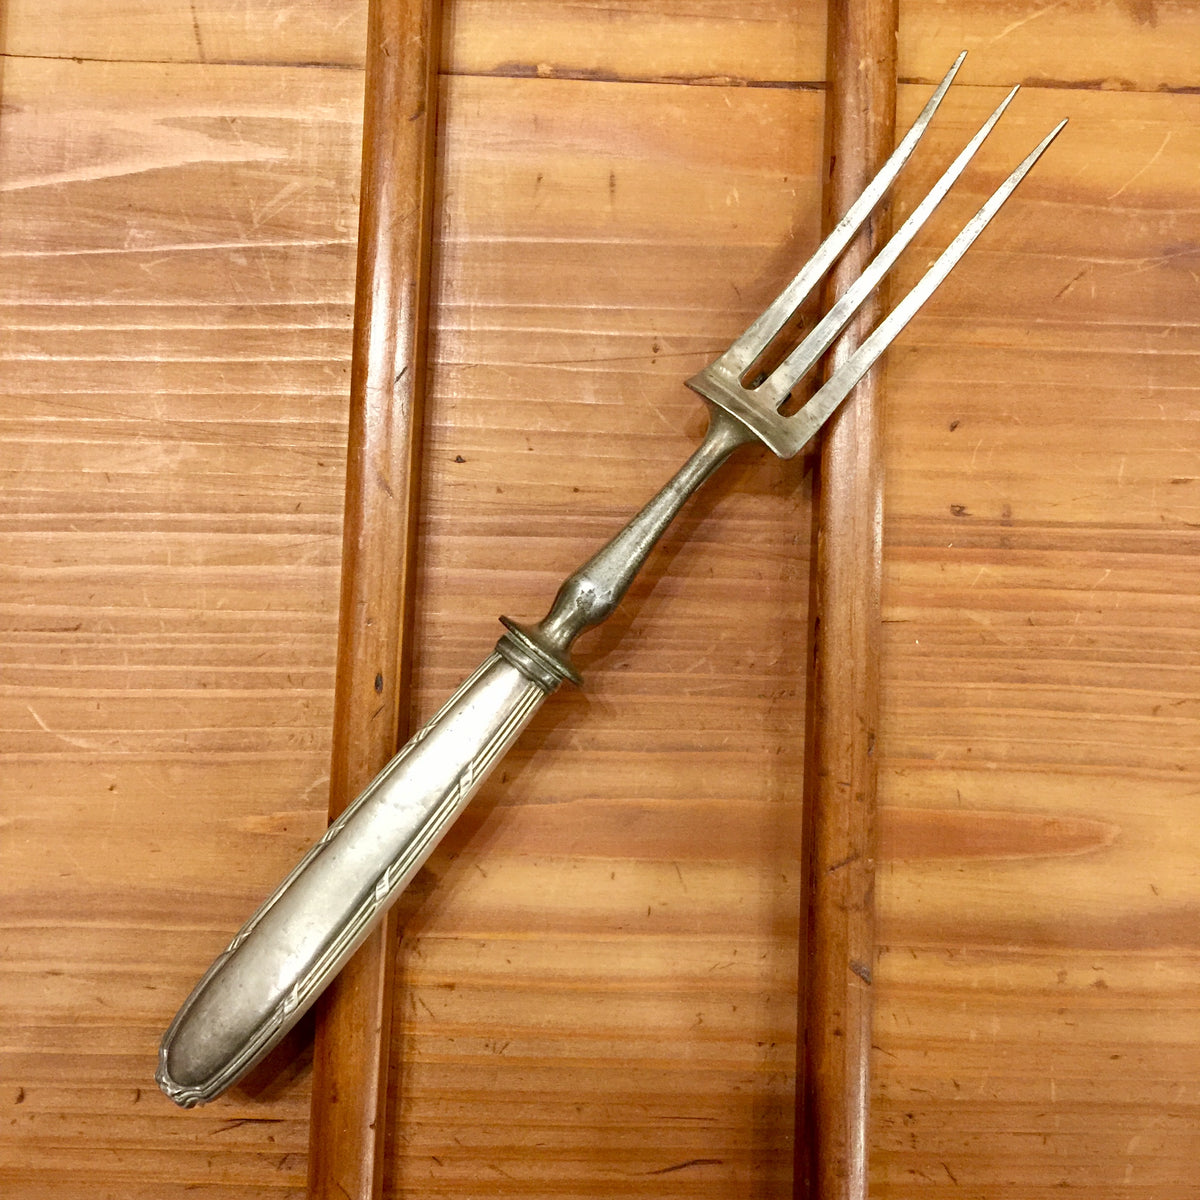 Antique French Fork 10.25" Silver & Nickel Plated Carbon